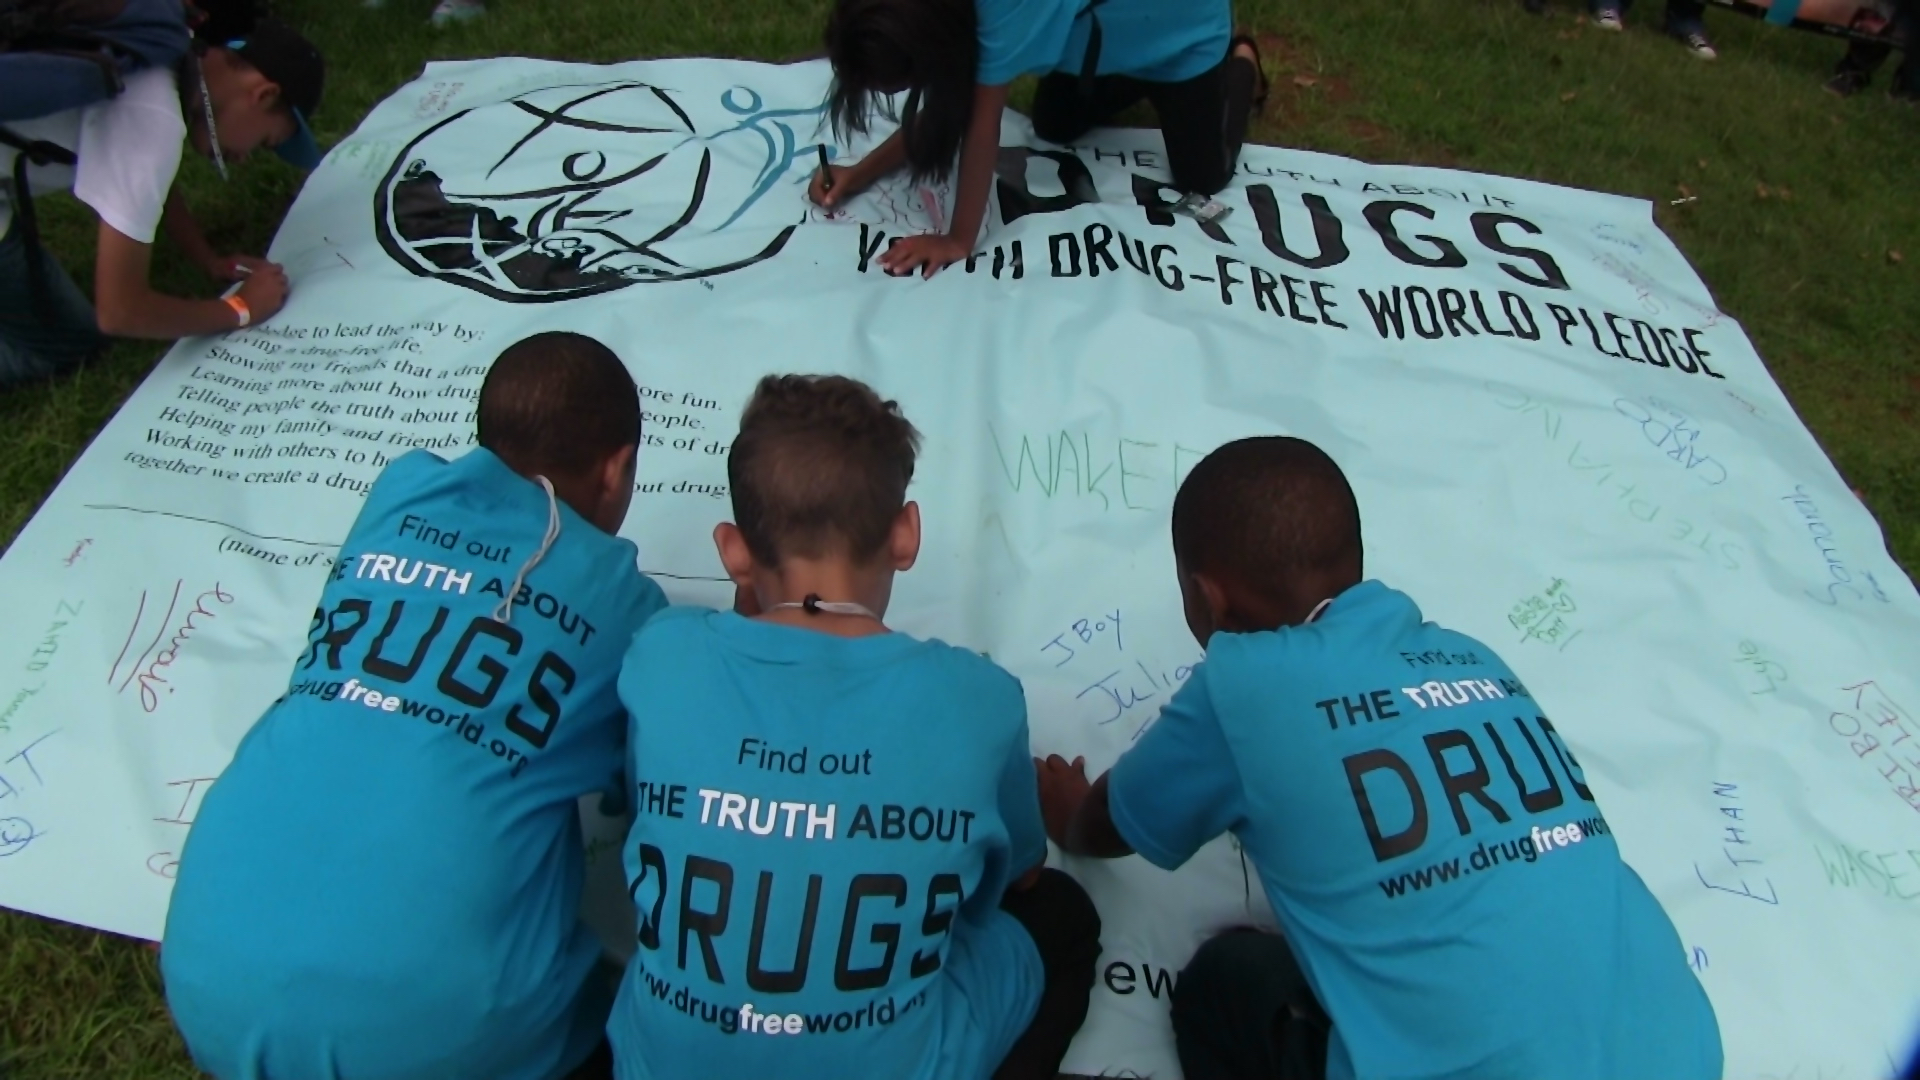 More than 2,000 young people signed the Drug-Free World Pledge commitment to live drug-free lives at the launch of the province-wide Truth About Drugs initiative on March 31.